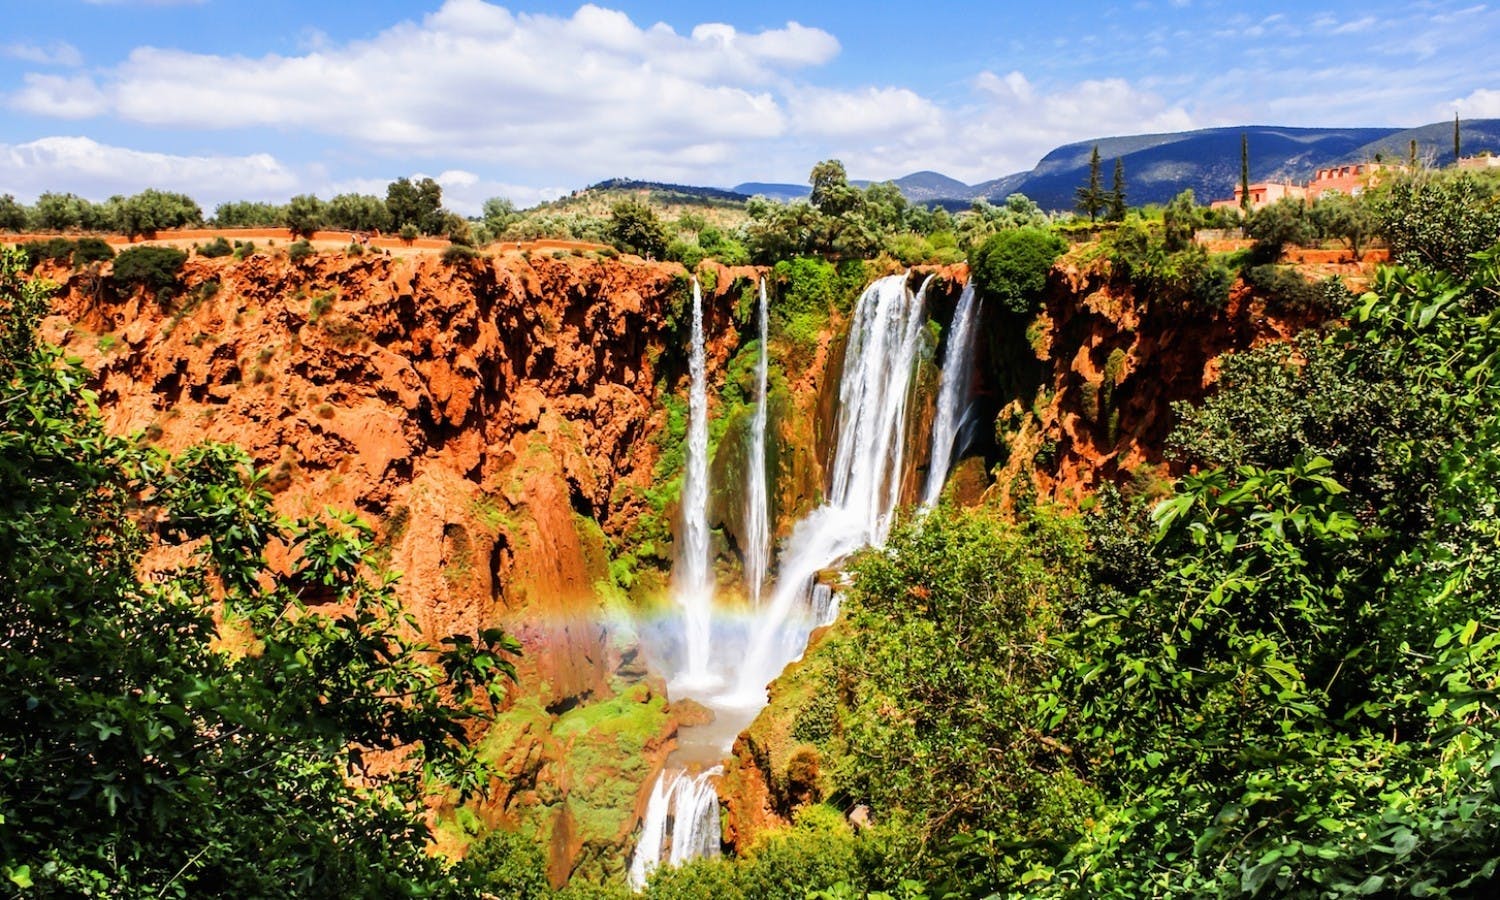 Ouzoud Waterfalls private tour from Marrakech